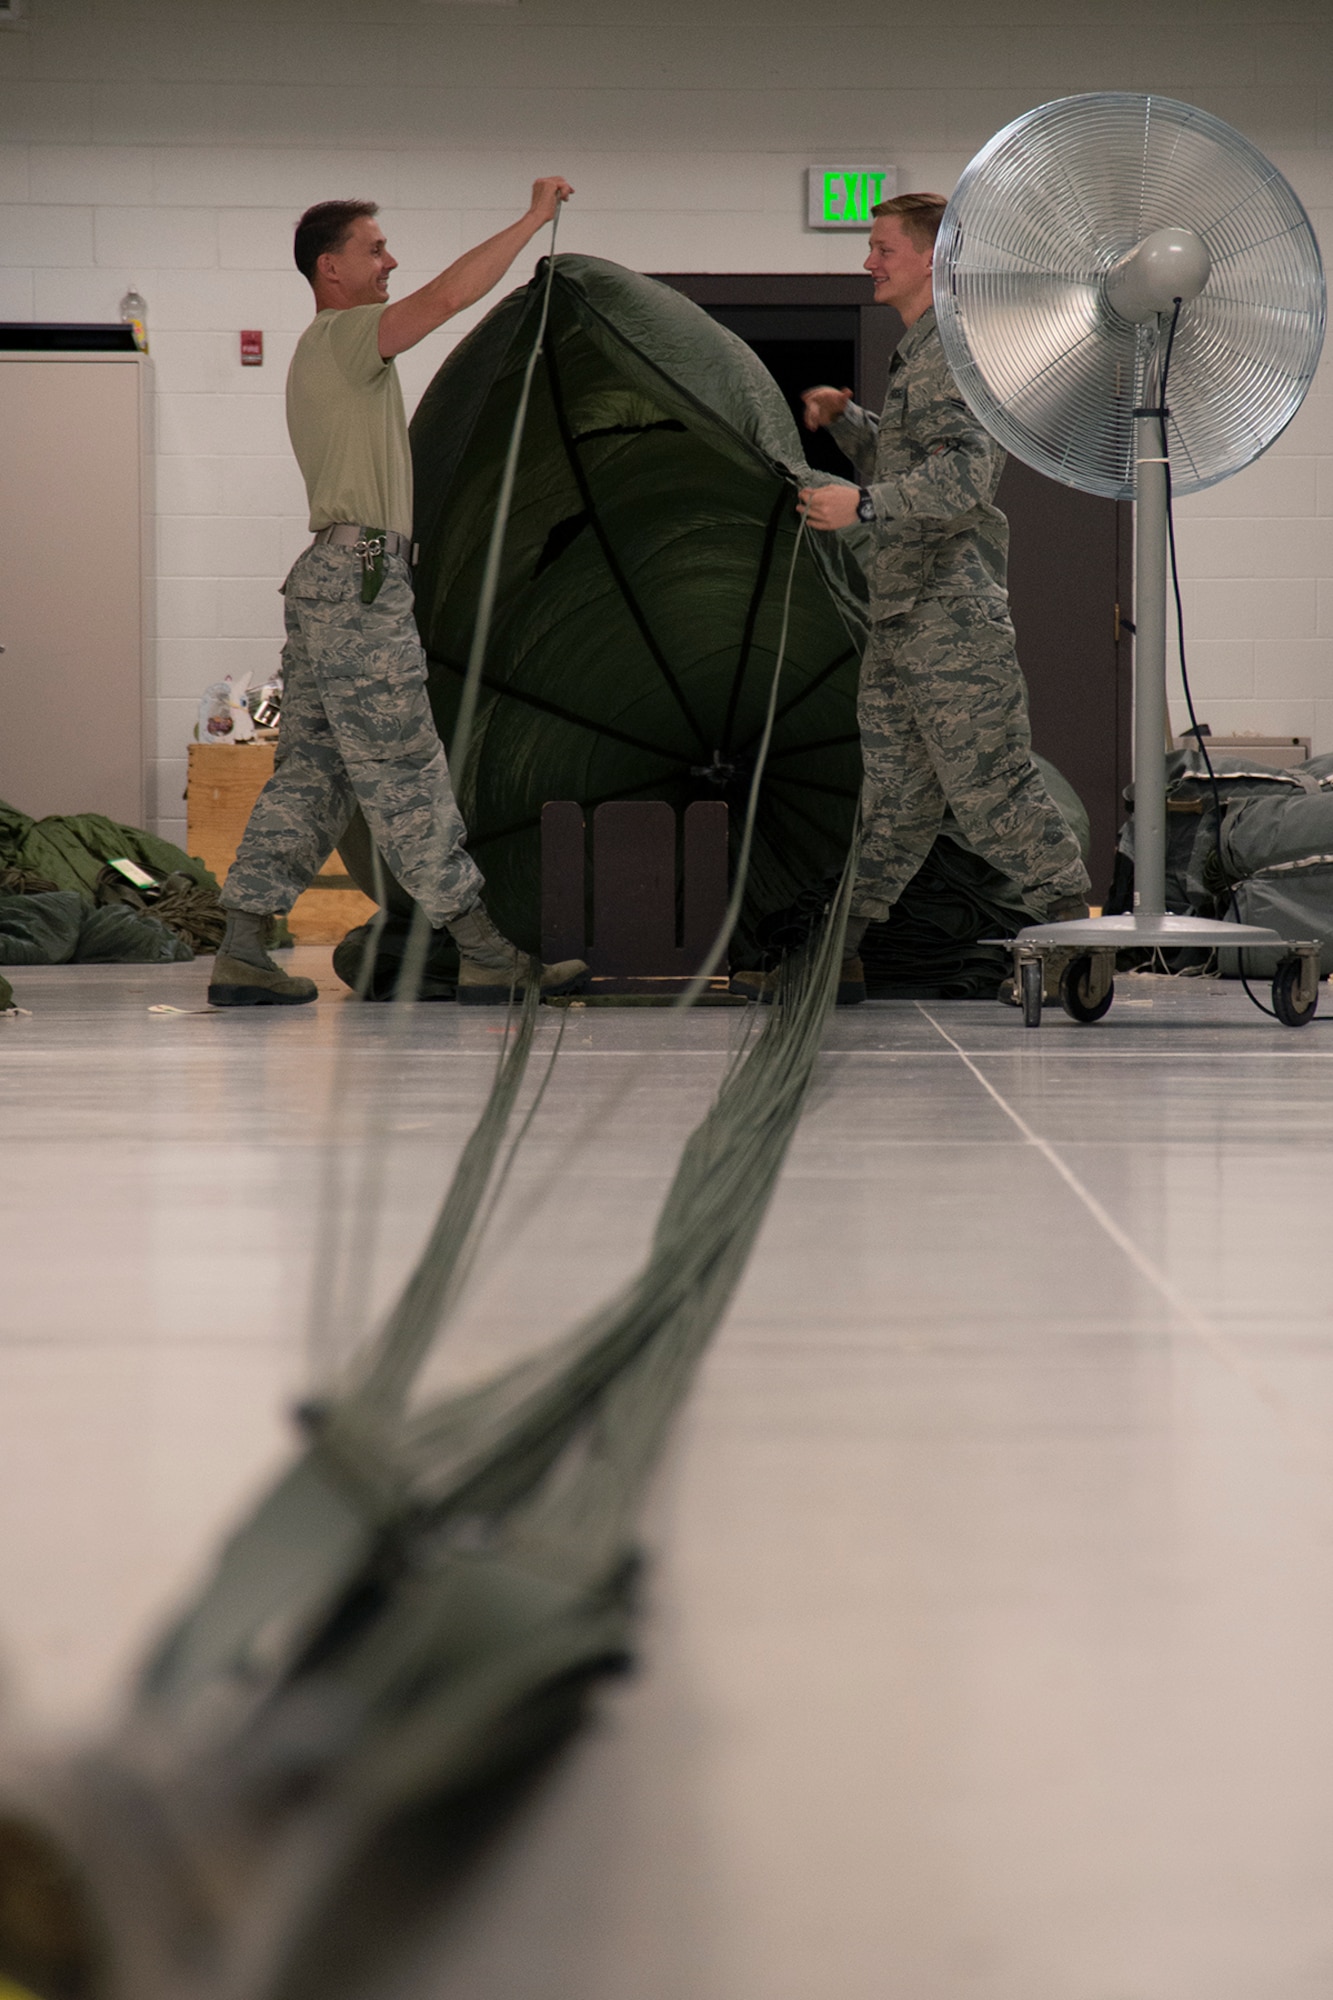 Senior Airman Will Lipscomb, left, and Airman 1st Class Tyler Pitts, both 39th Aerial Port Squadron air transportation technicians, practice inspecting a G-12 parachute at Peterson Air Force Base, Colorado, April 16, 2019. The